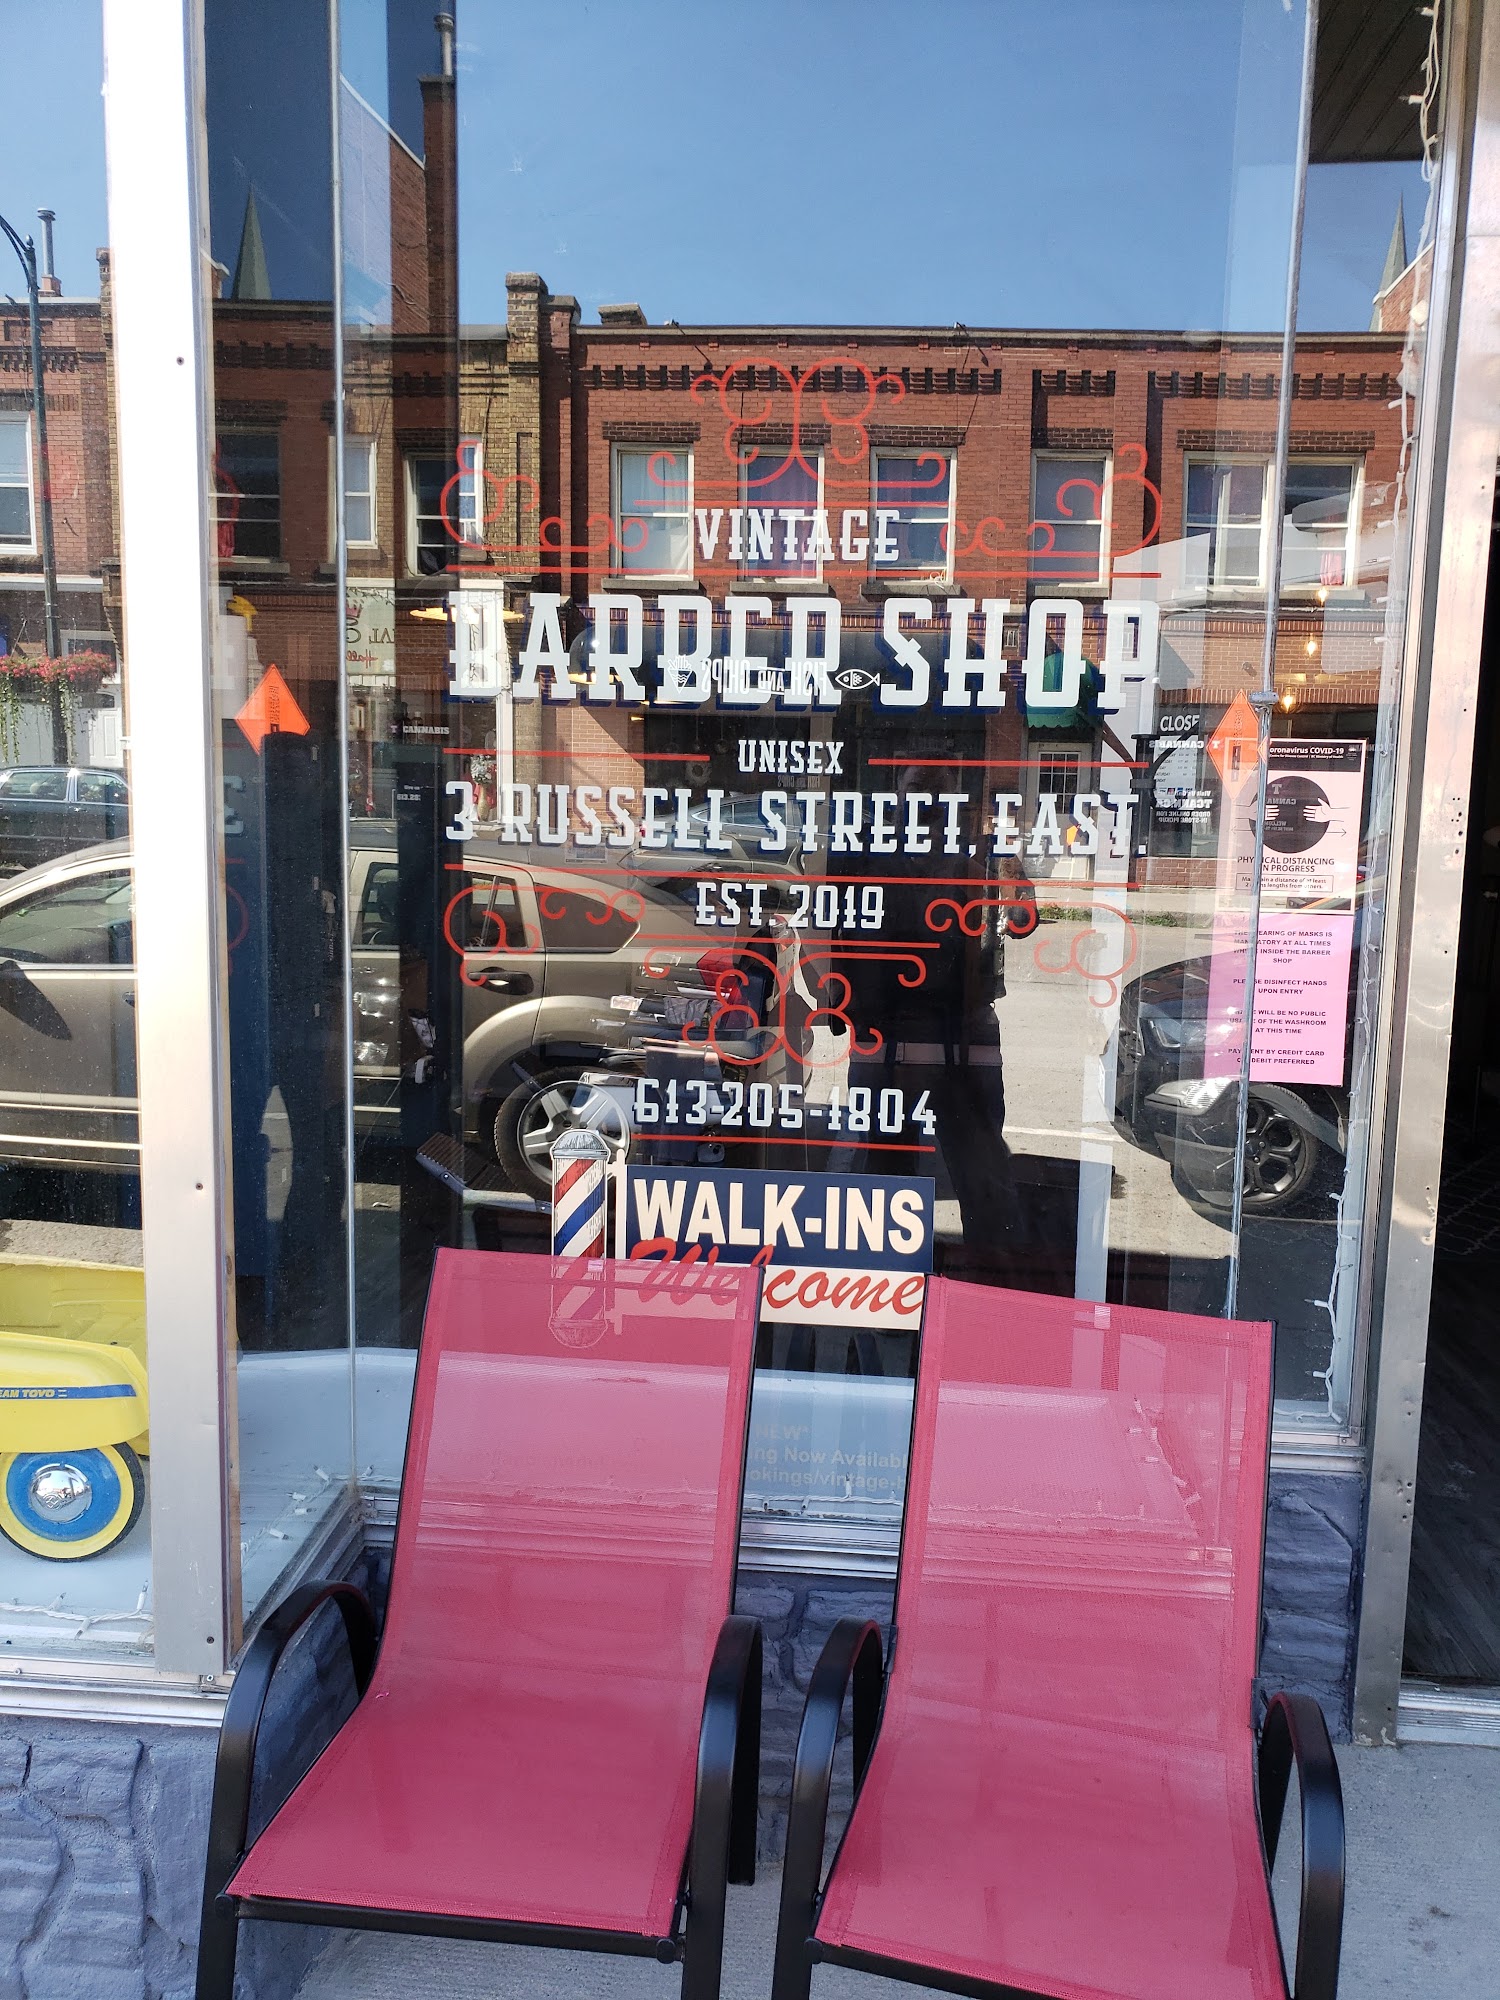 The Vintage Barber Shop and Tattoo